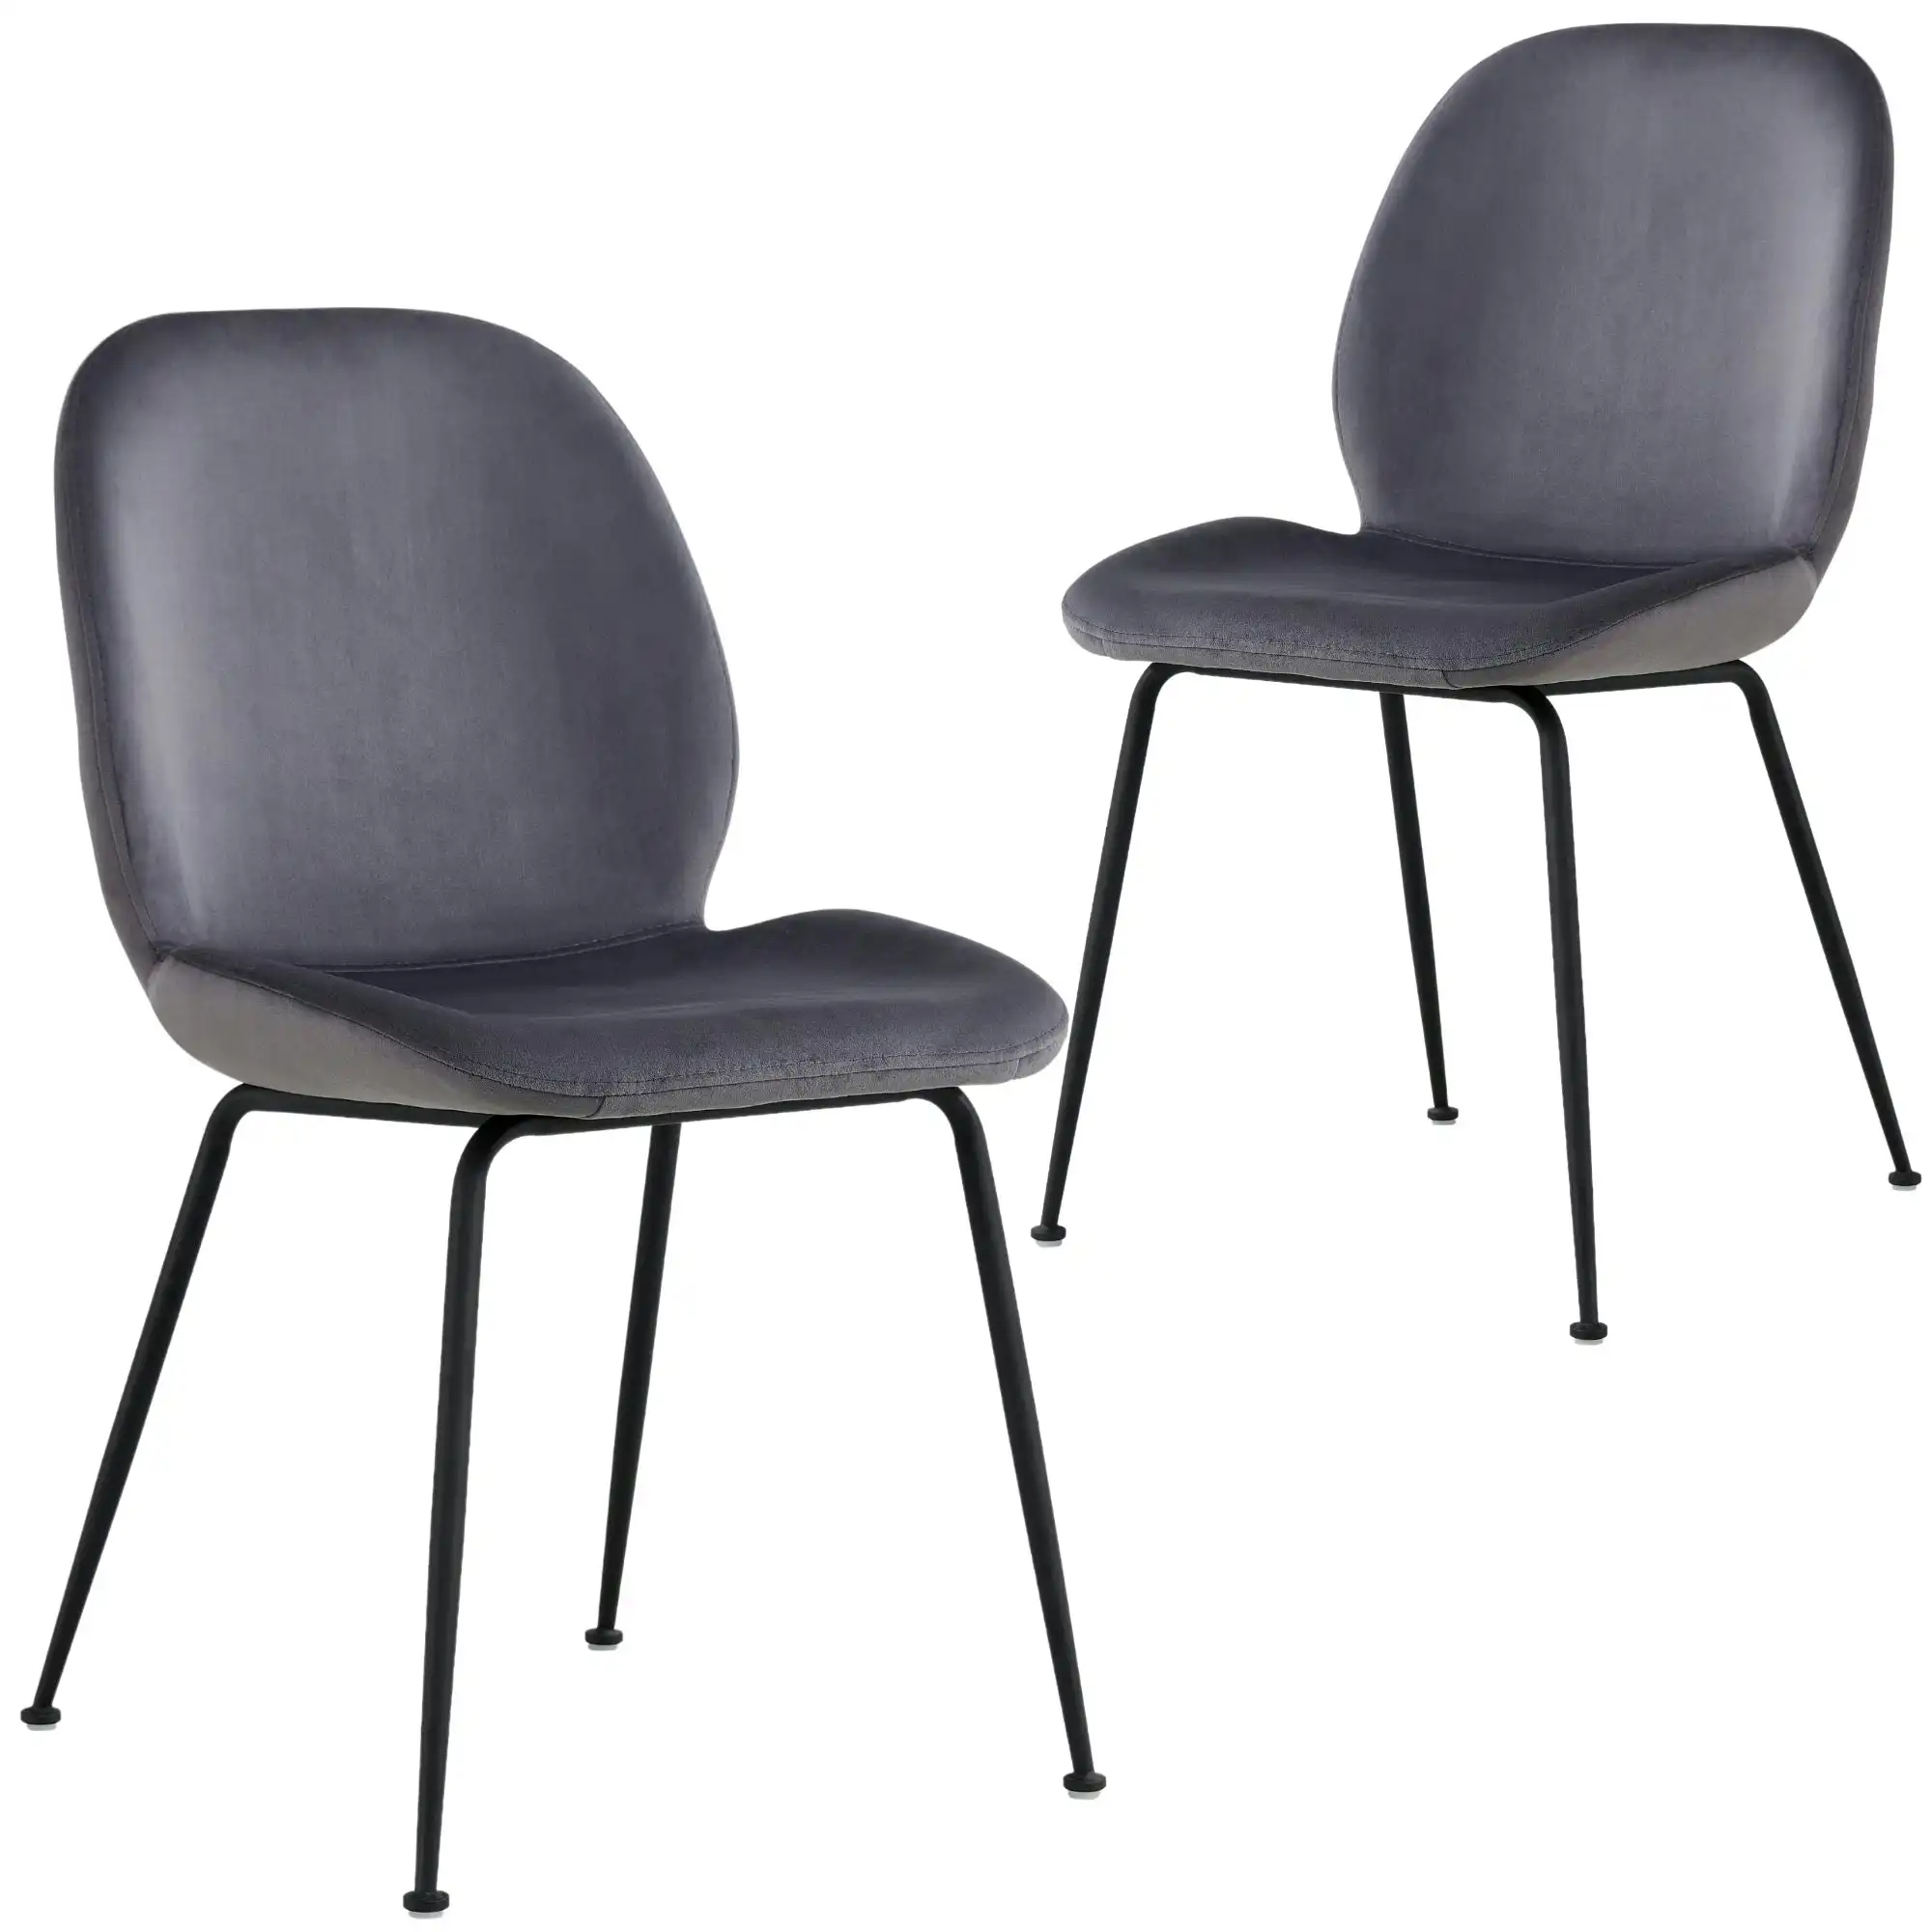 Remy Set of 2 Dining Chair